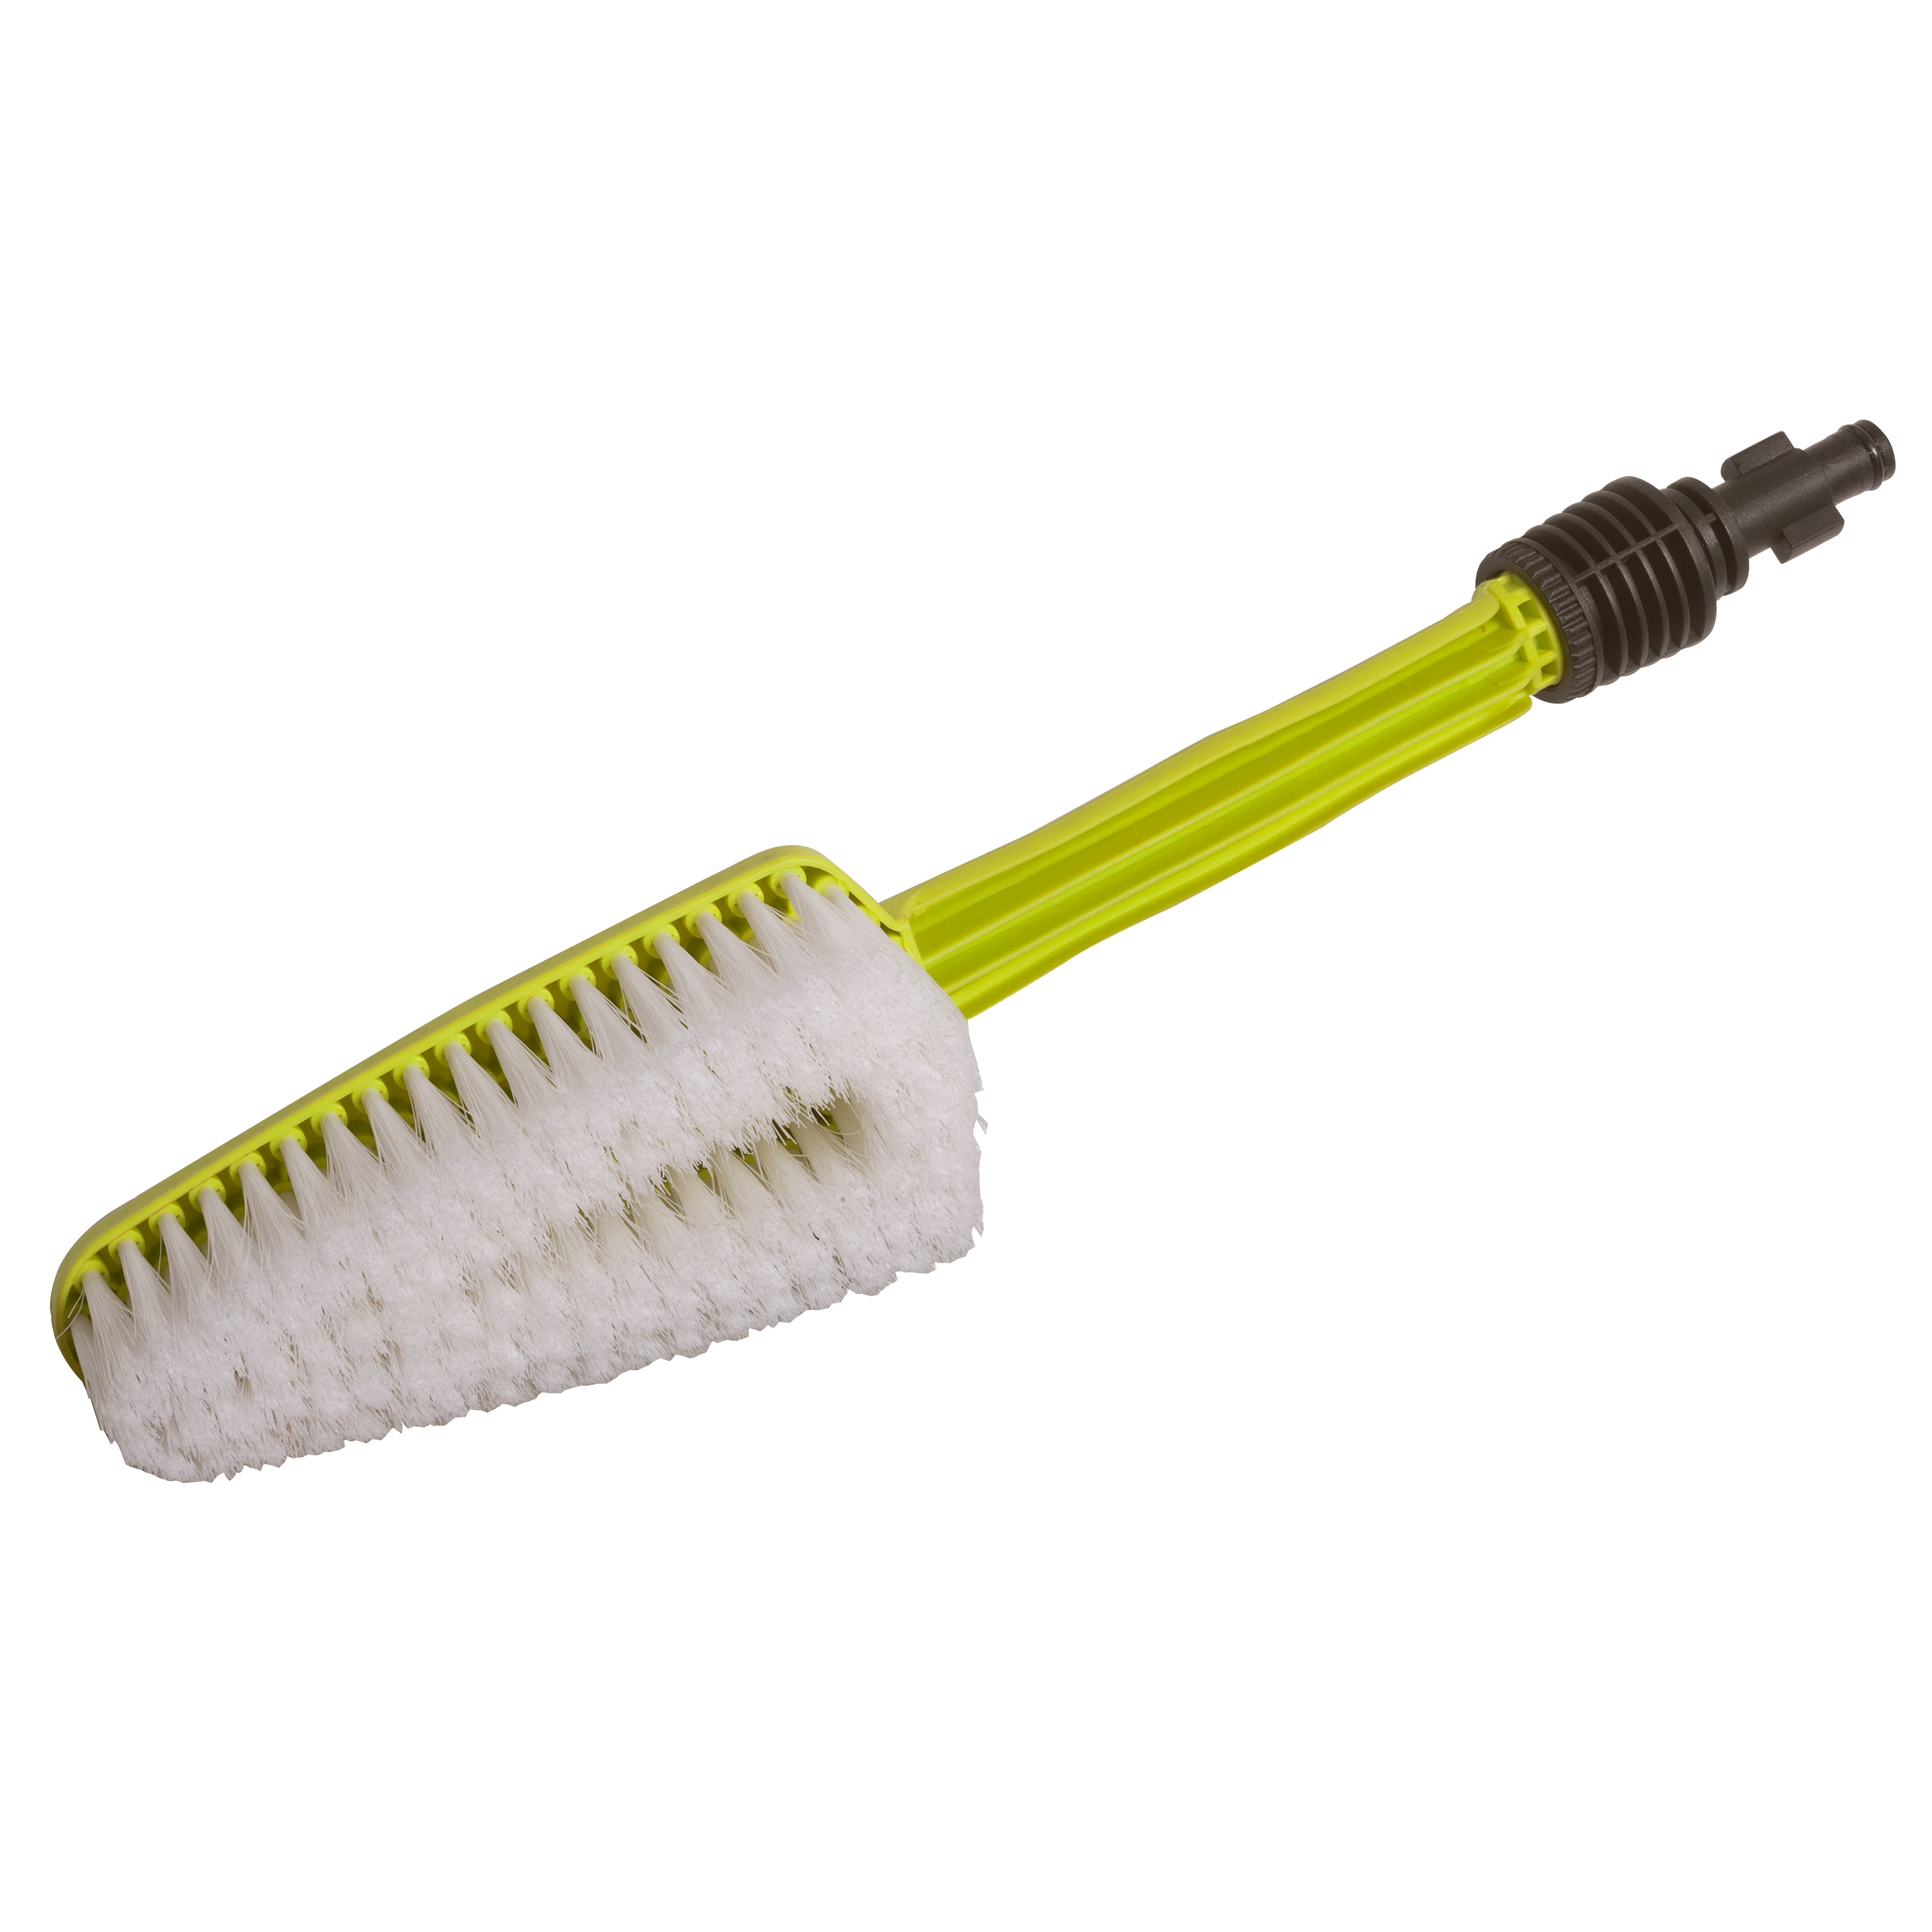 PowerPlay 8-in Plastic Rotating Brush - Gear Driven Rotary Brush for  Pressure Washer, Saves 60-80% Time, Improved Cleaning Performance